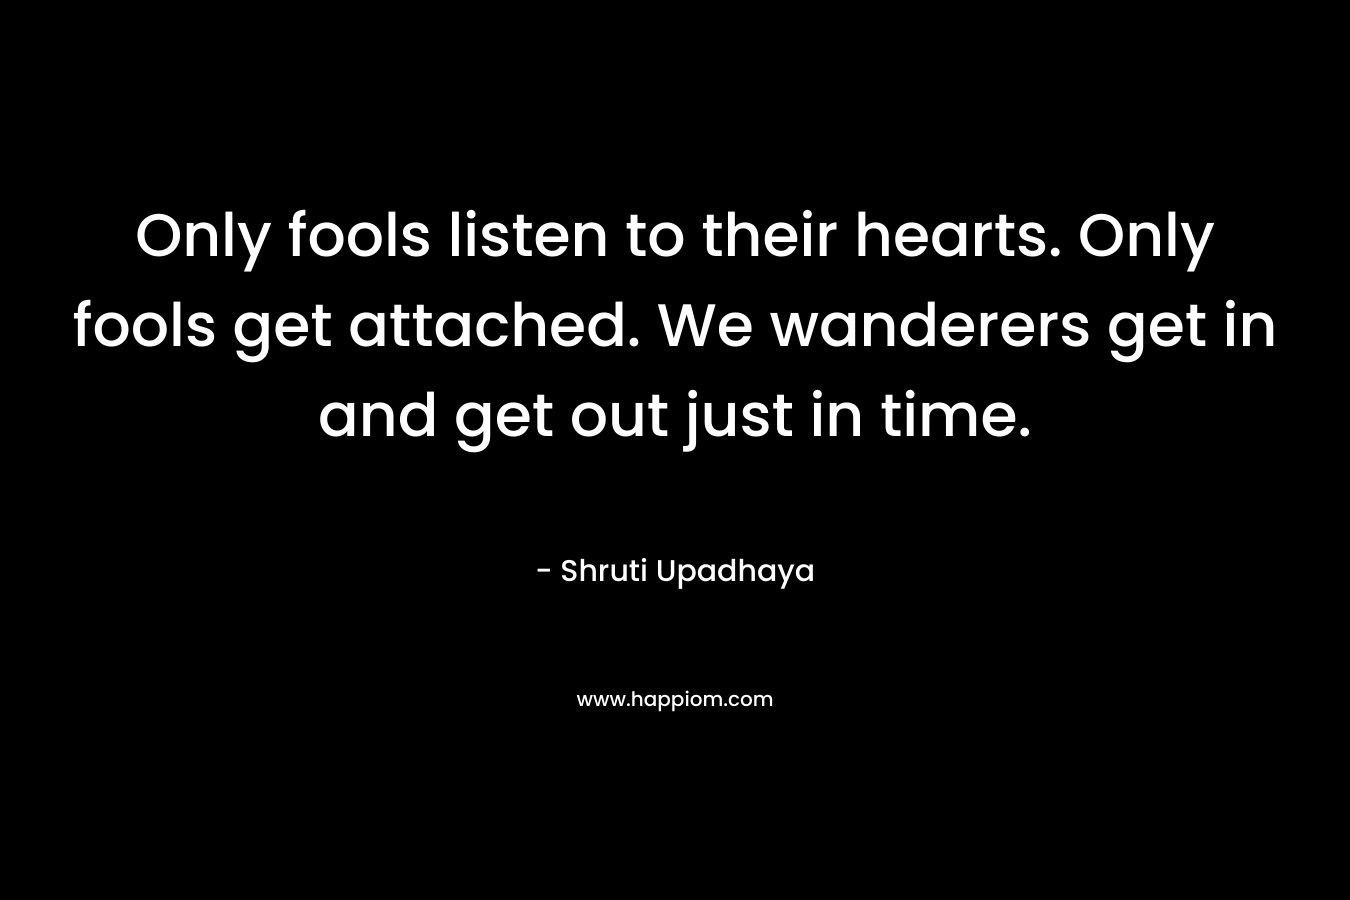 Only fools listen to their hearts. Only fools get attached. We wanderers get in and get out just in time.